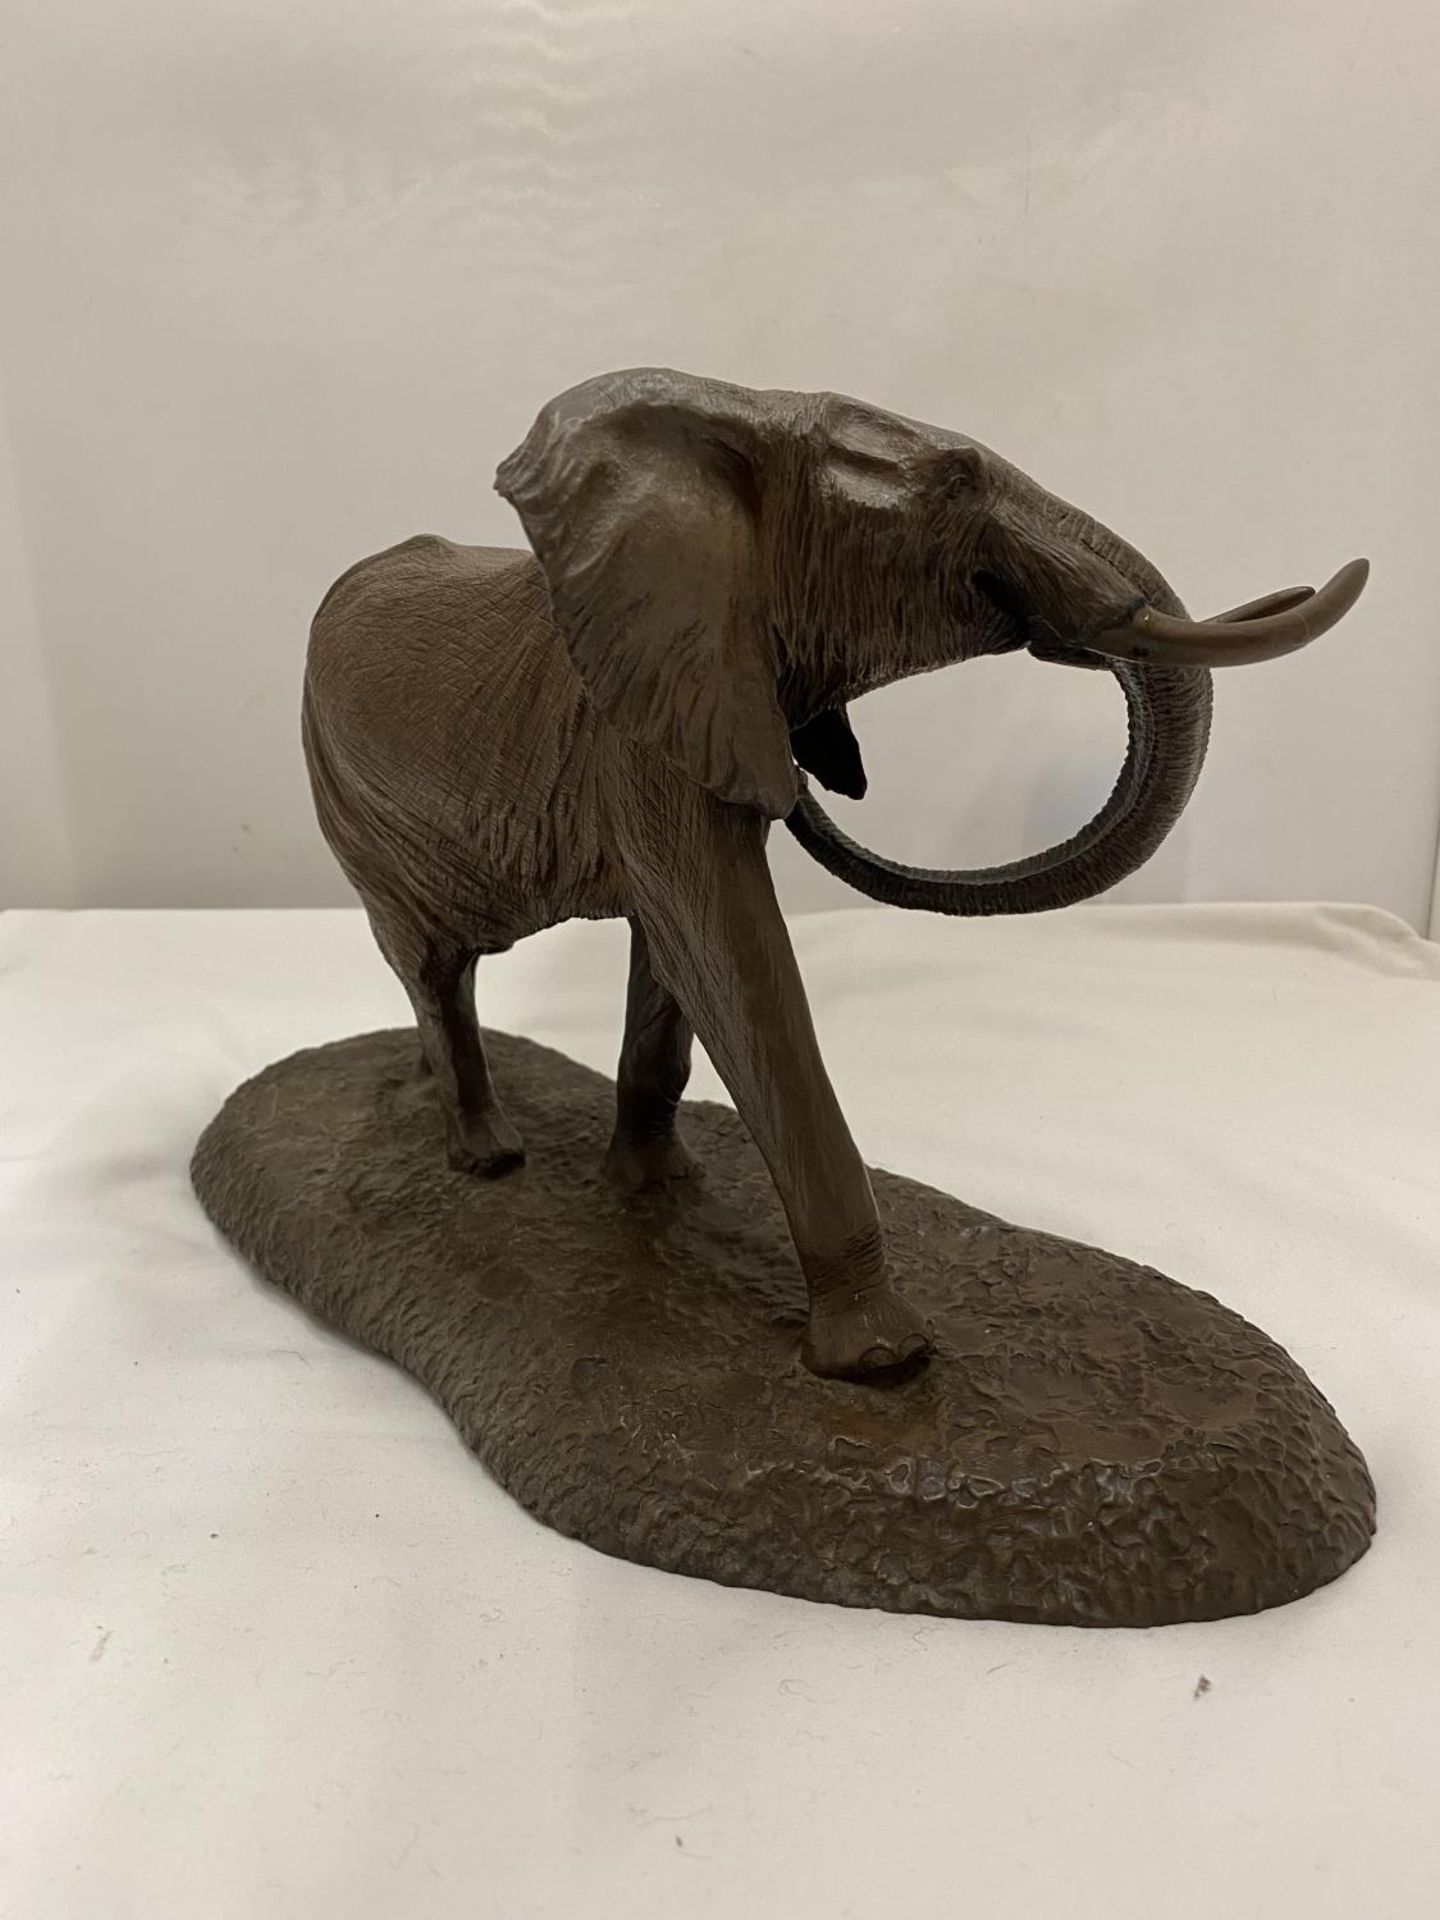 A ROBERT GLEN "GIANT OF THE AFRICAN PLAINS" ELEPHANT EAST AFRICAN WILDLIFE SOCIETY FIGURE (TUSK A/F) - Image 8 of 16